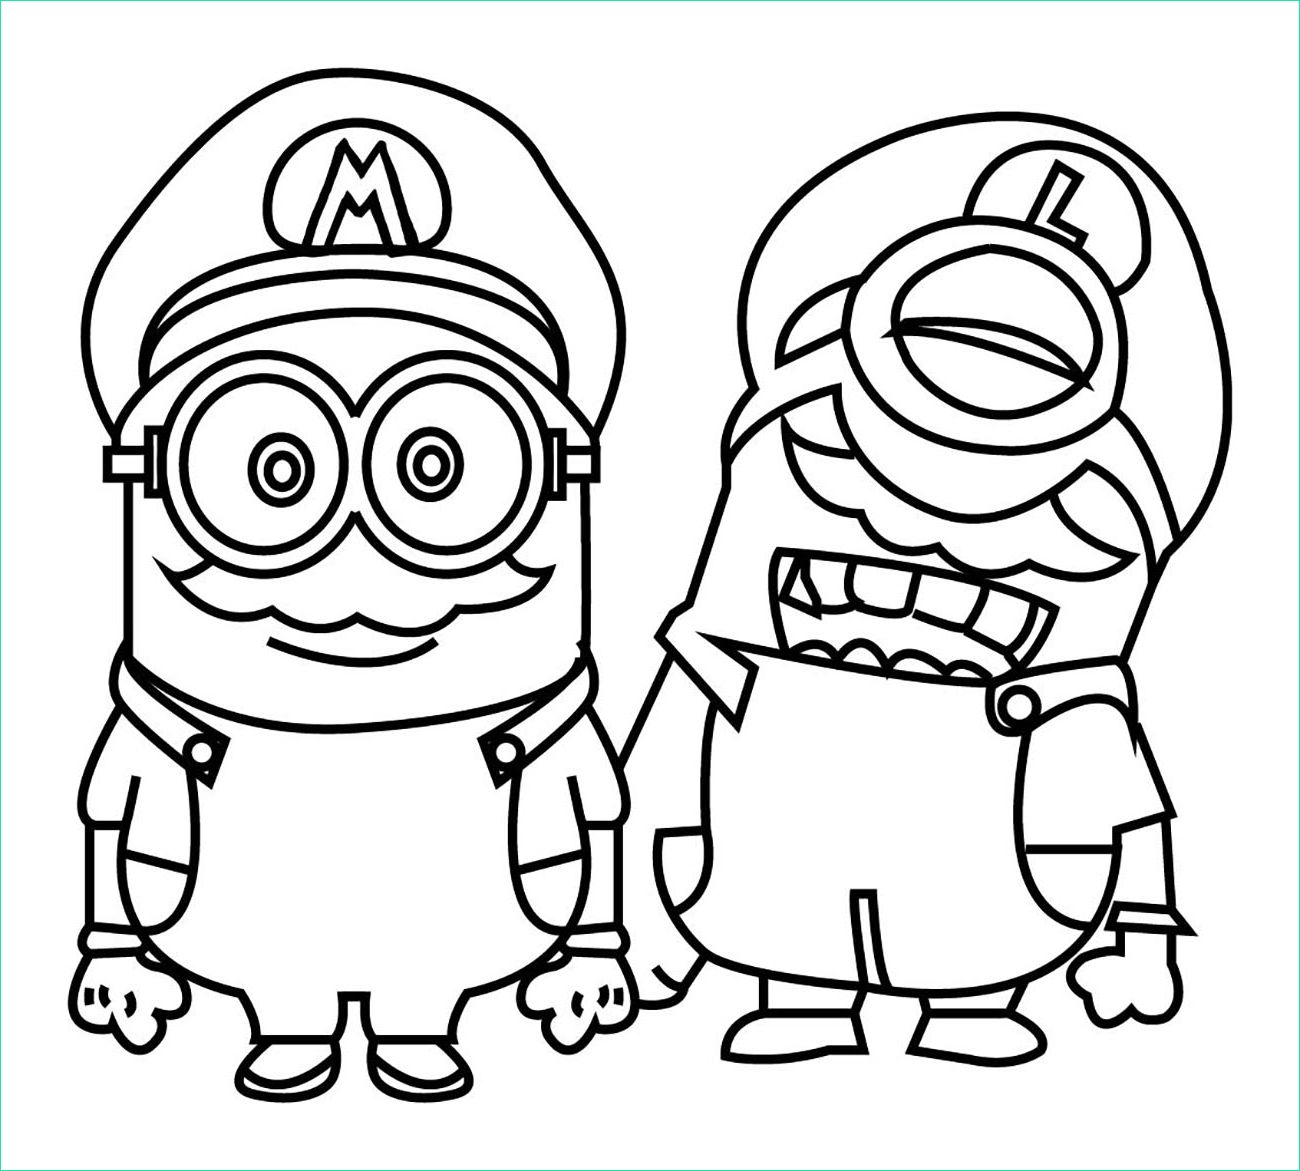 Dessin Les Minions Impressionnant Photographie Minions to Print Minions Kids Coloring Pages